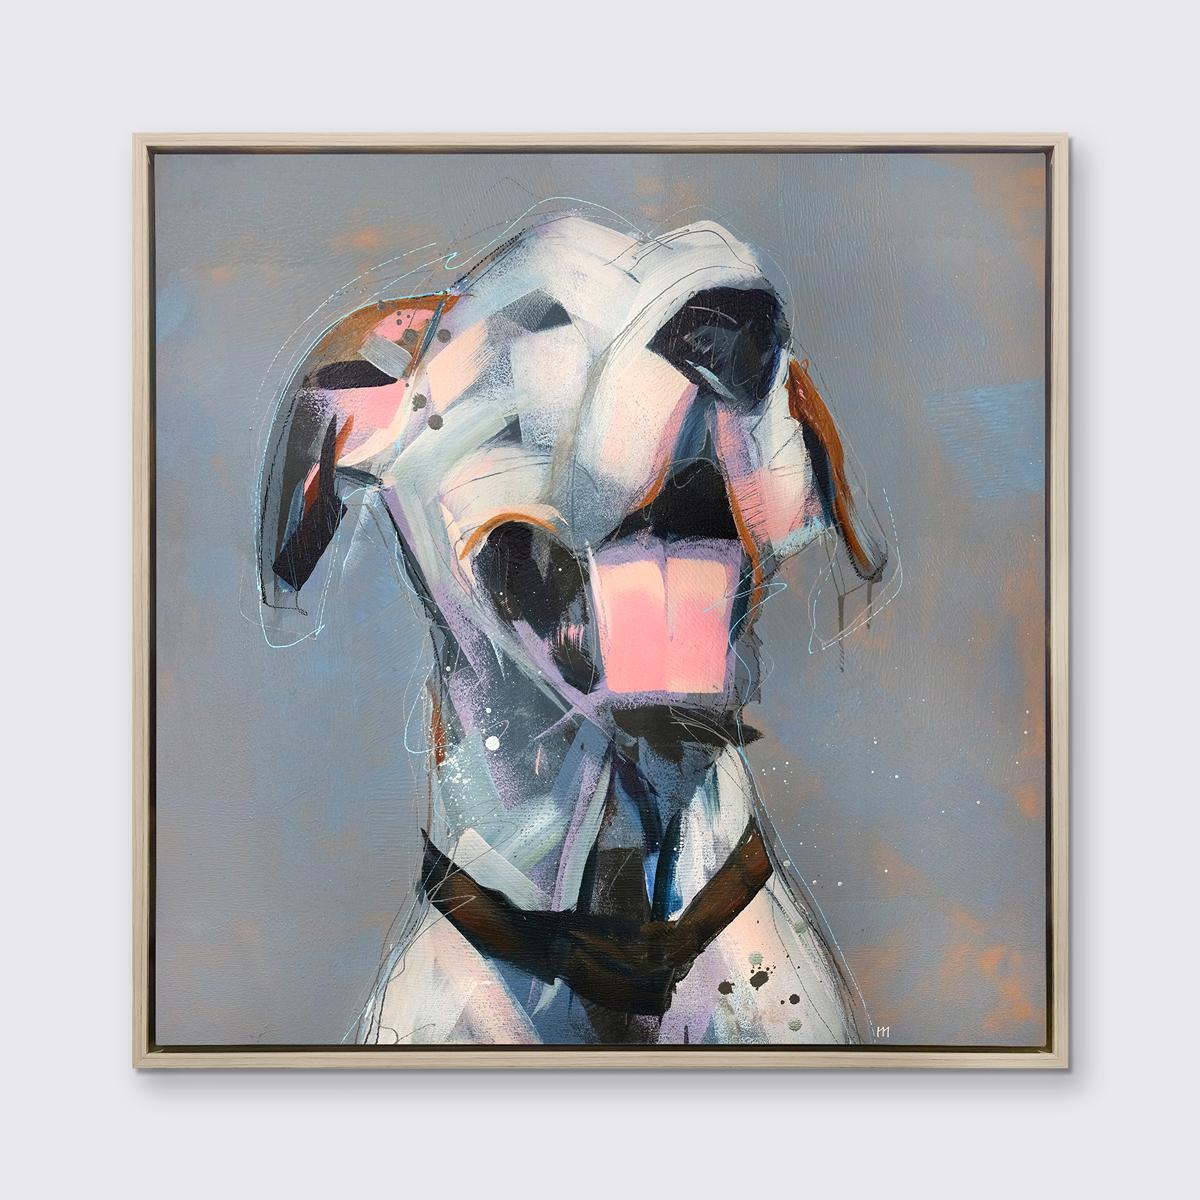 This abstracted print of a dog by artist Russell Miyaki features a light neutral palette with expressive, playful elements to create an energetic composition of a Dalmatian with his mouth open and pink tongue extended on a grey background. 

This